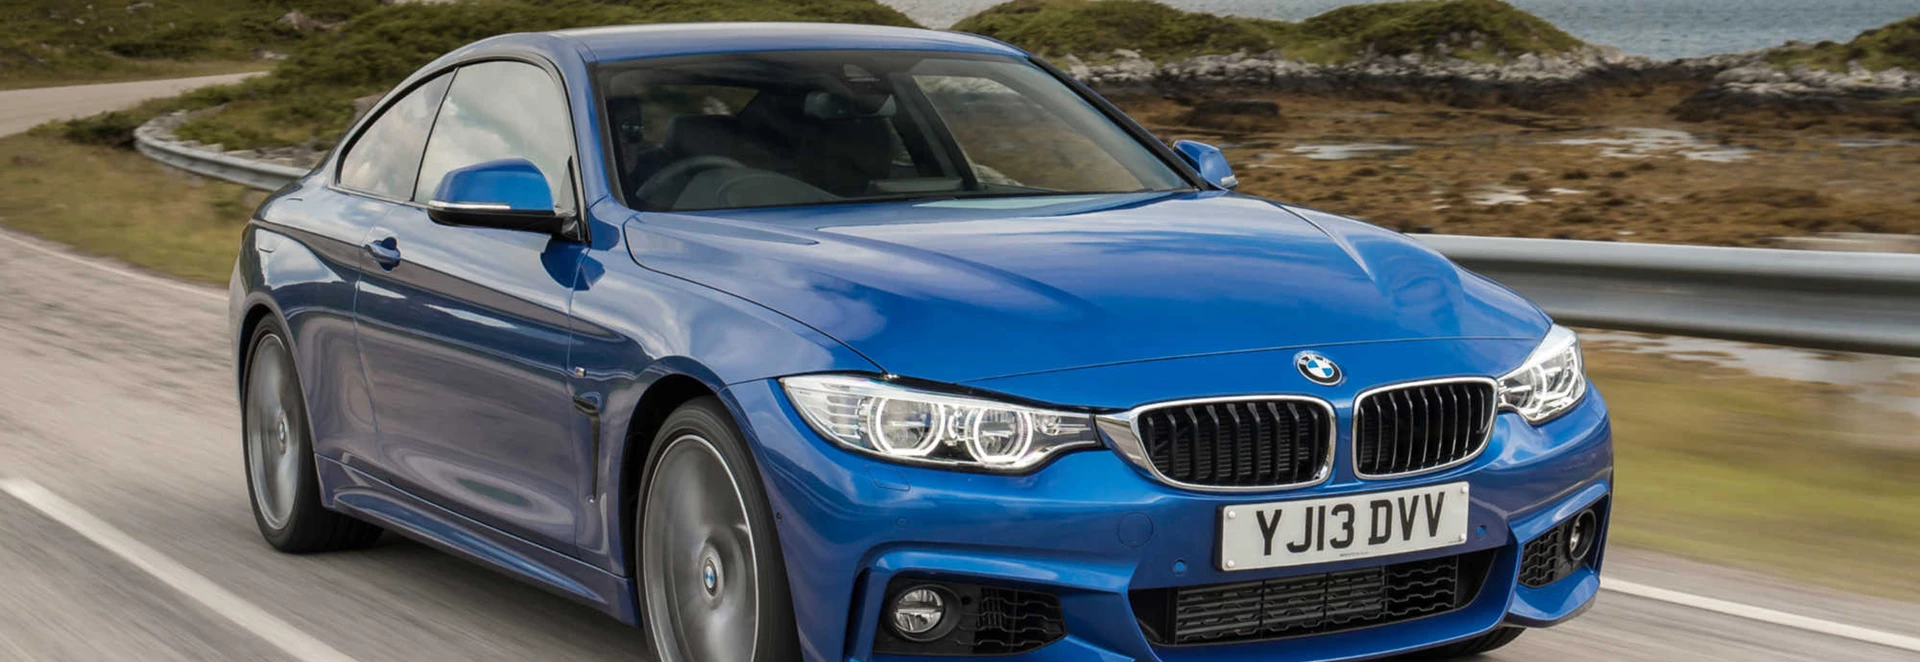 BMW 4 Series coupe review 